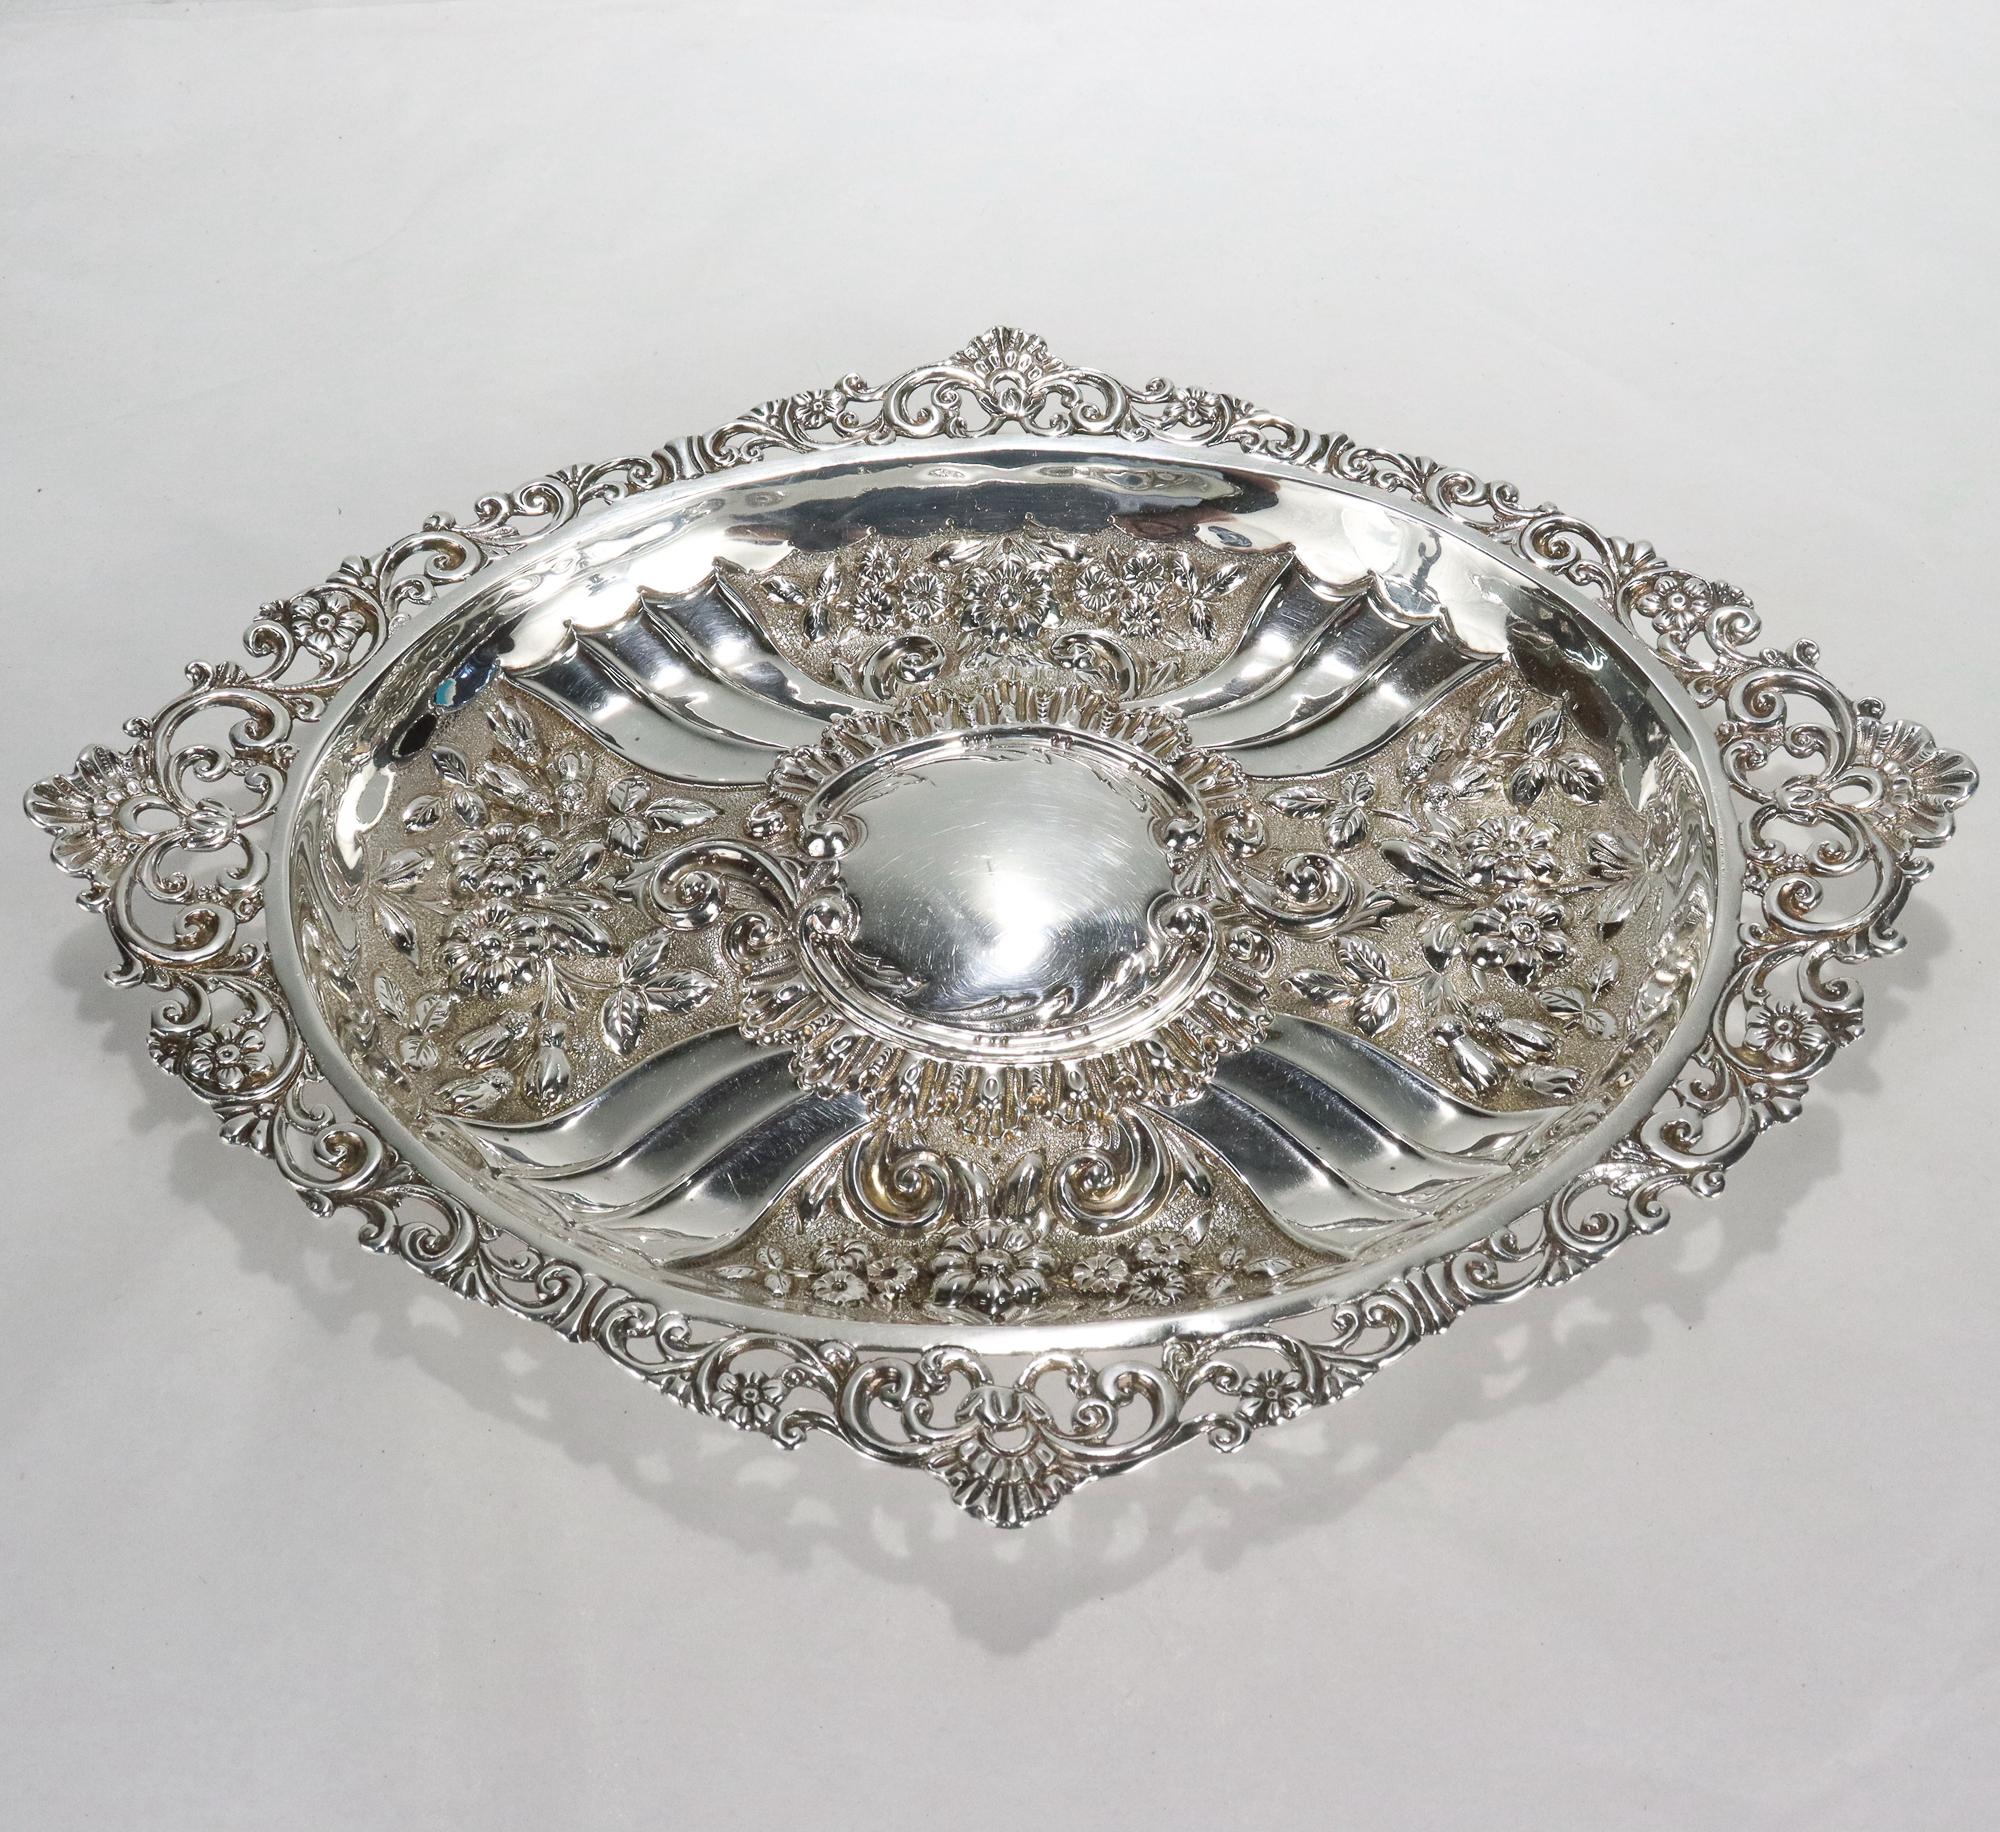 A fine antique English sterling silver dresser tray. 

Made by Charles Engelhard for Mappin & Webb.

Struck CE for Charles Engelhard, Lion's heart, Lion rampant, C for 1898.

Simply a great ornate sterling silver tray!

Date:
1898

Overall